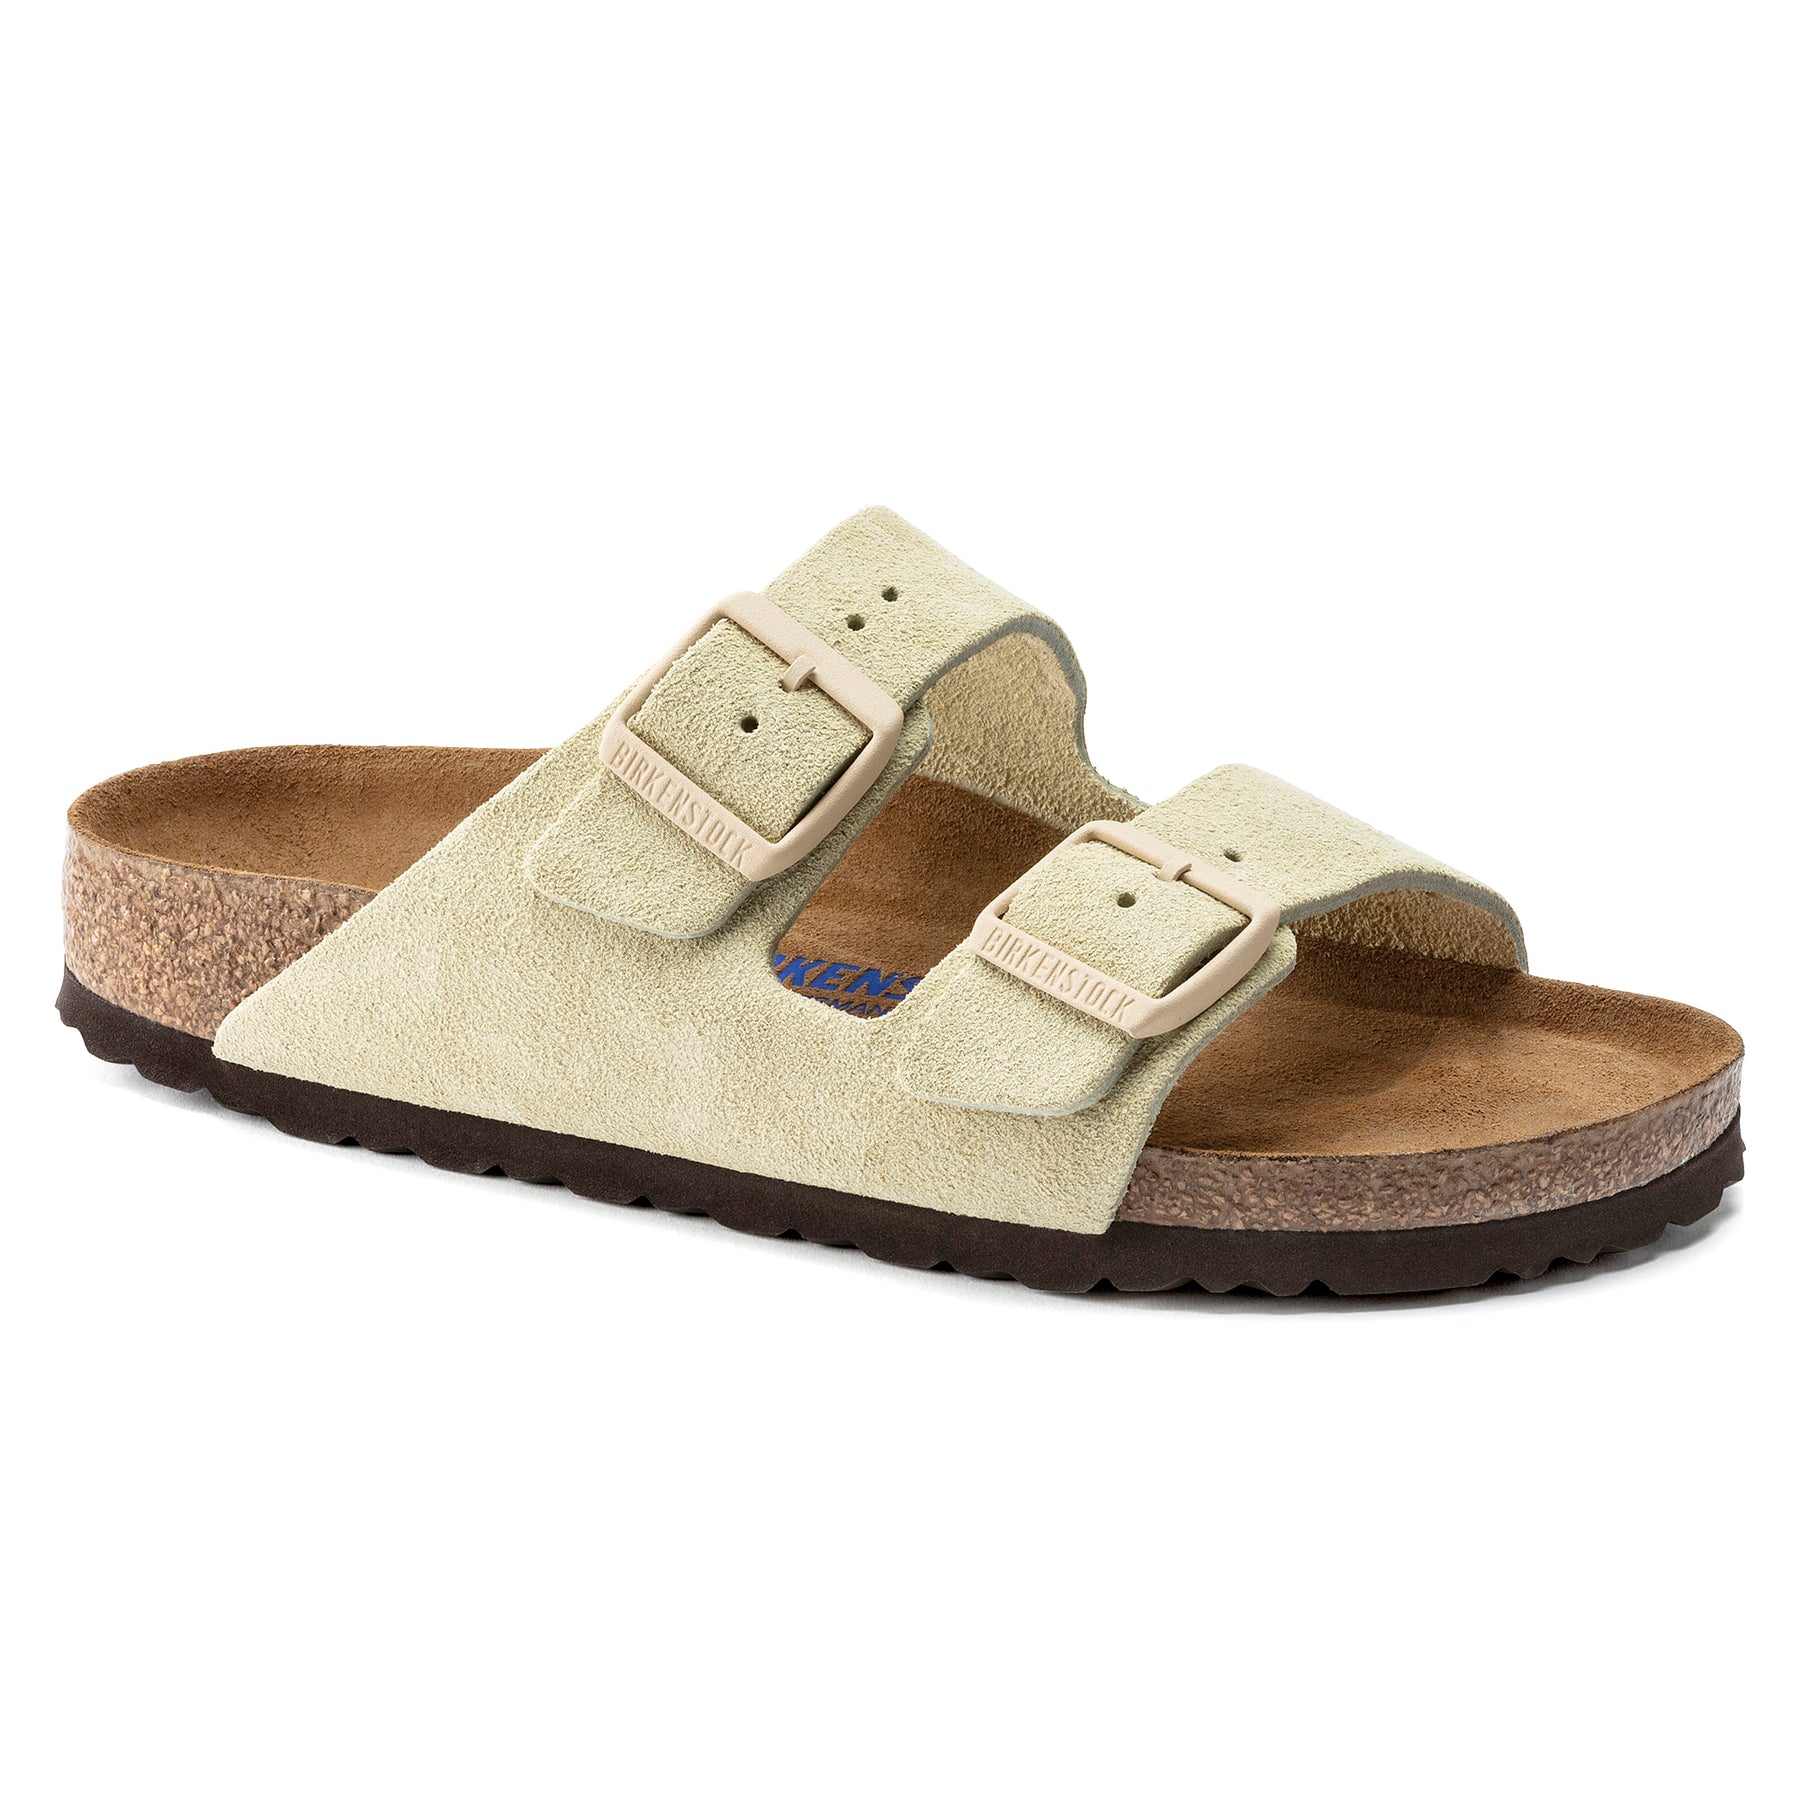 Birkenstock Limited Edition Arizona Soft Footbed almond suede